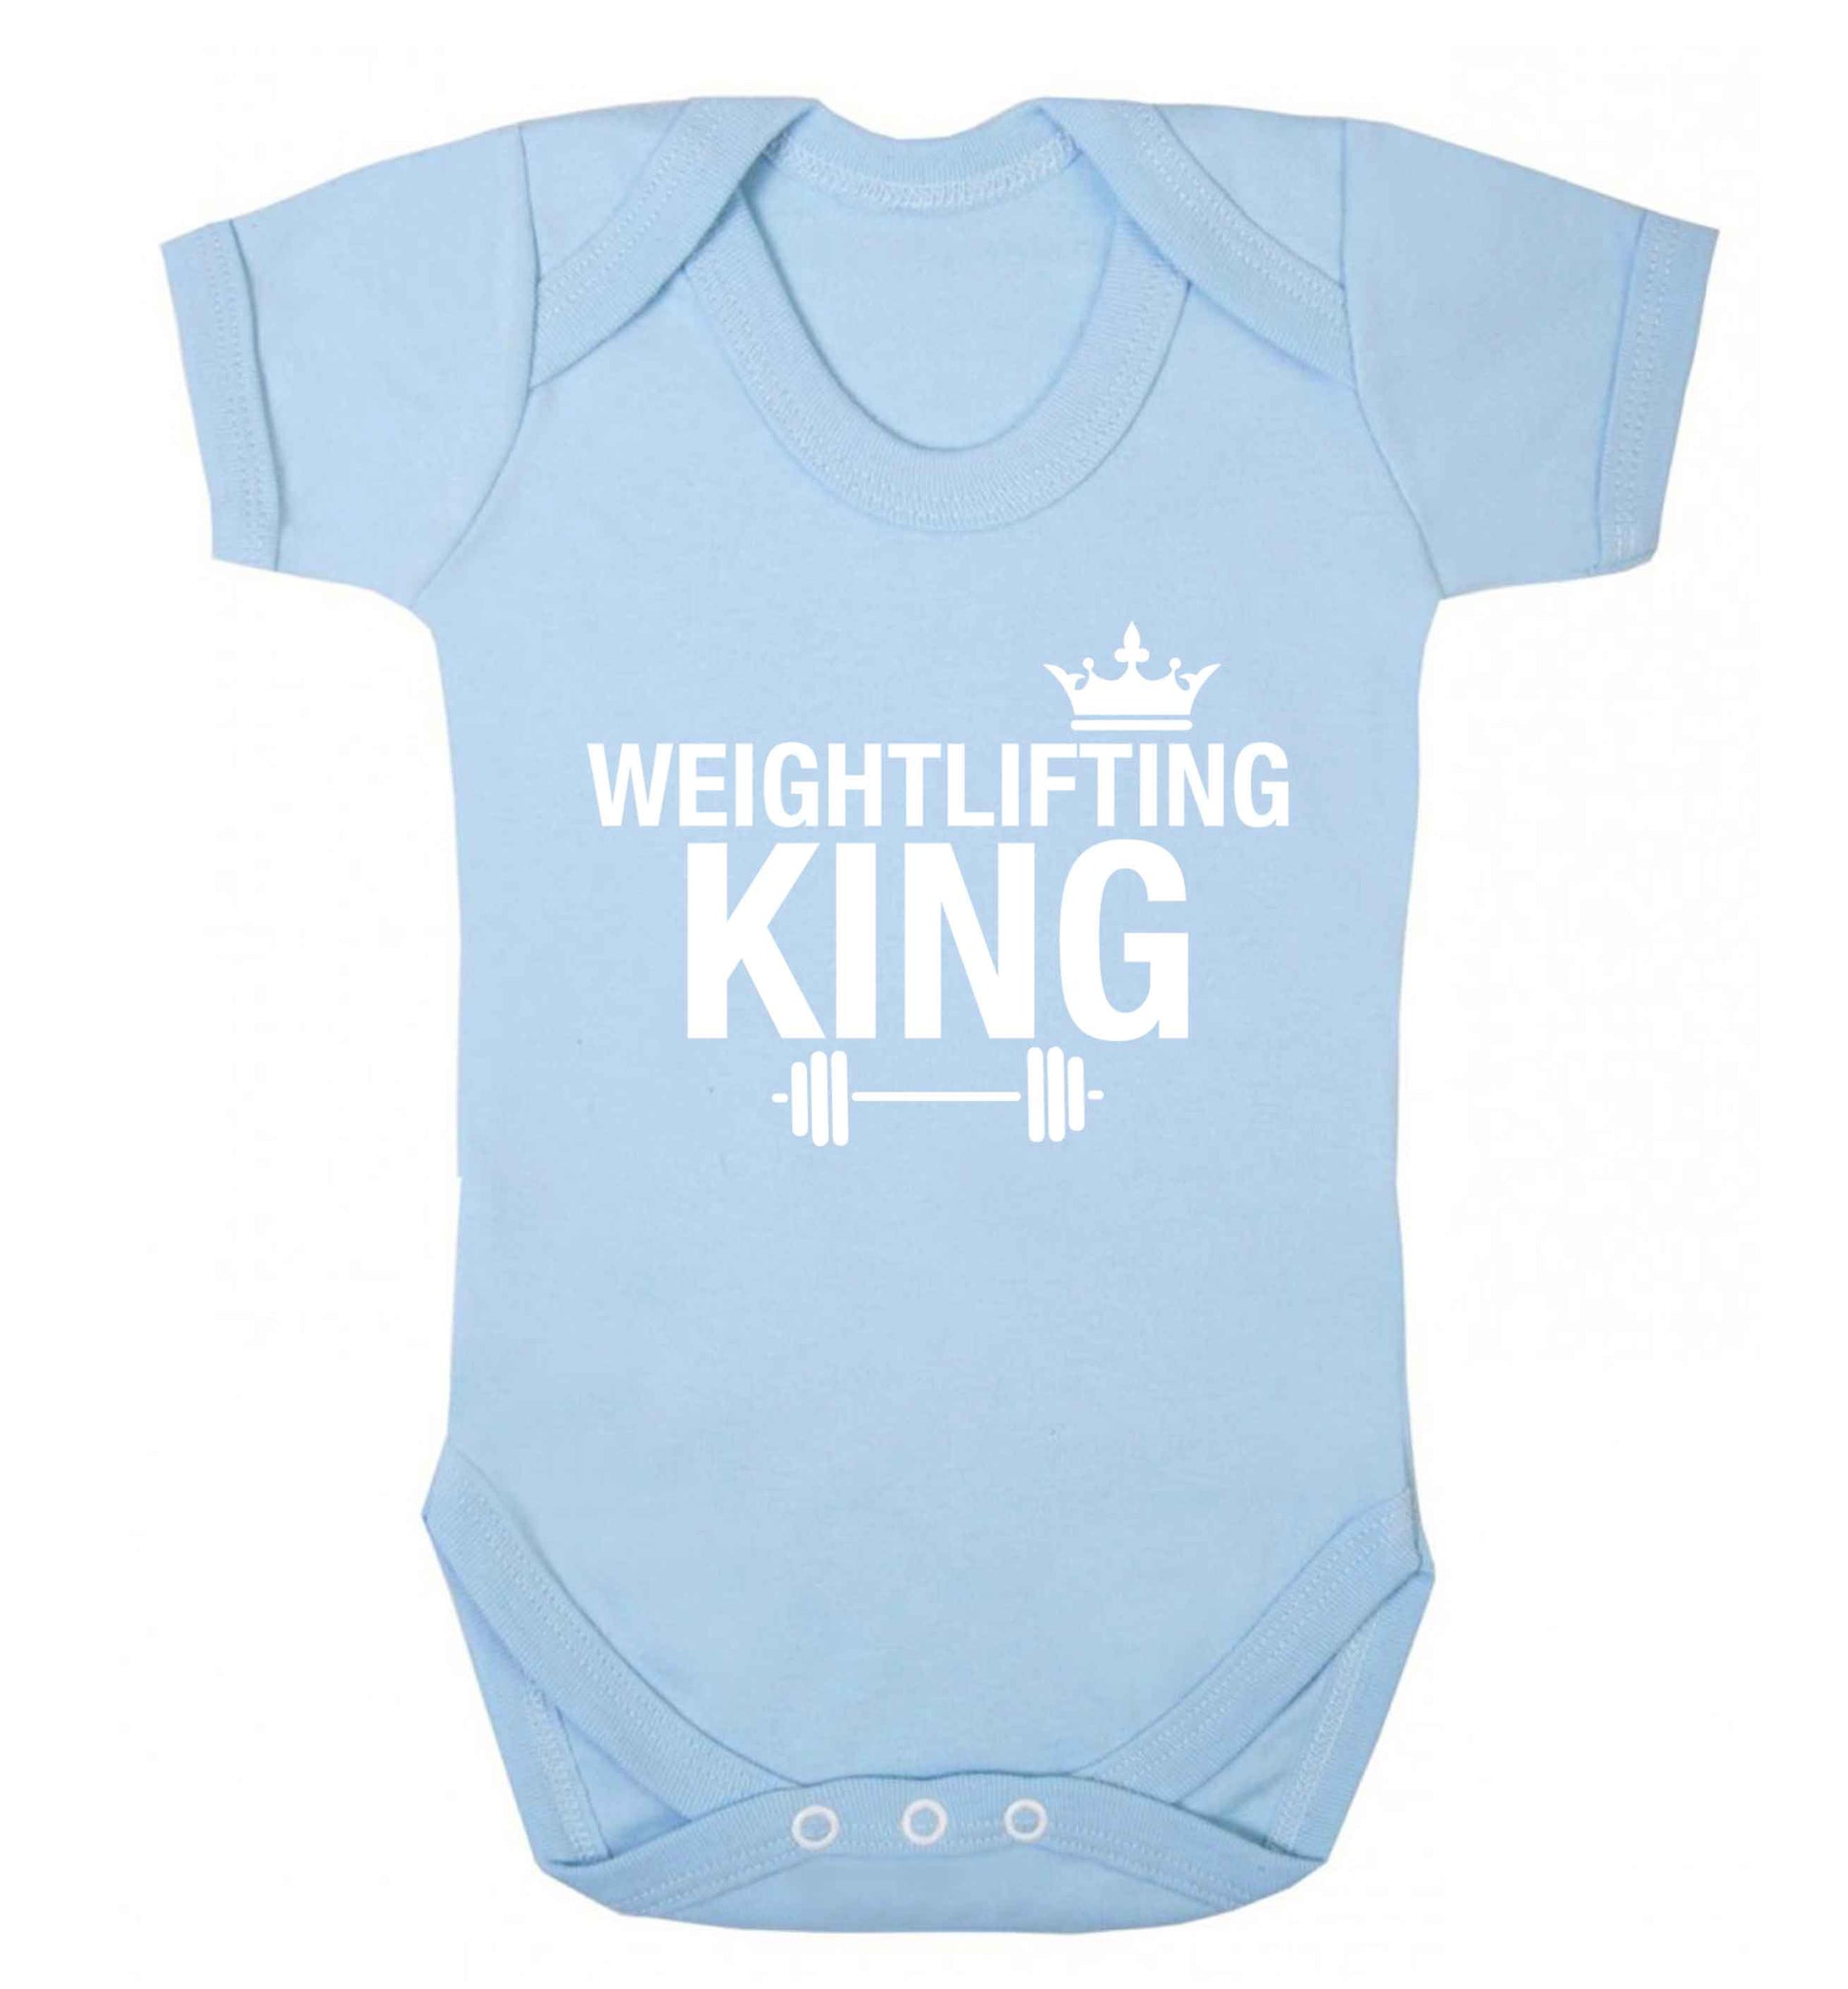 Weightlifting king Baby Vest pale blue 18-24 months